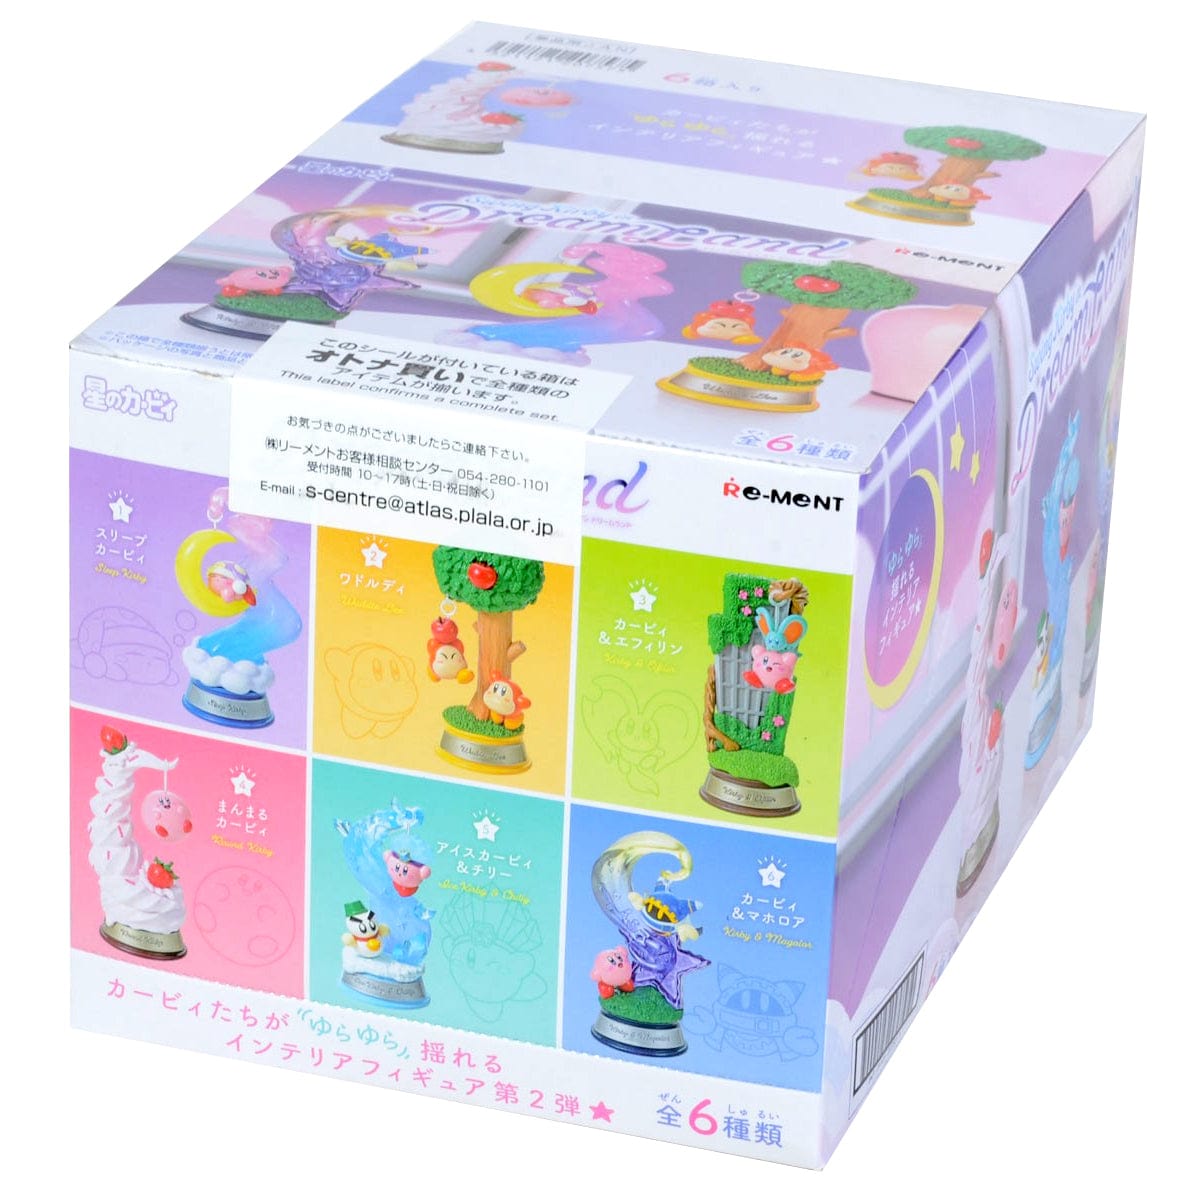 JBK Rement Kirby of the Stars Swing Kirby in Dream Land Surprise Box Kawaii Gifts 4521121207575